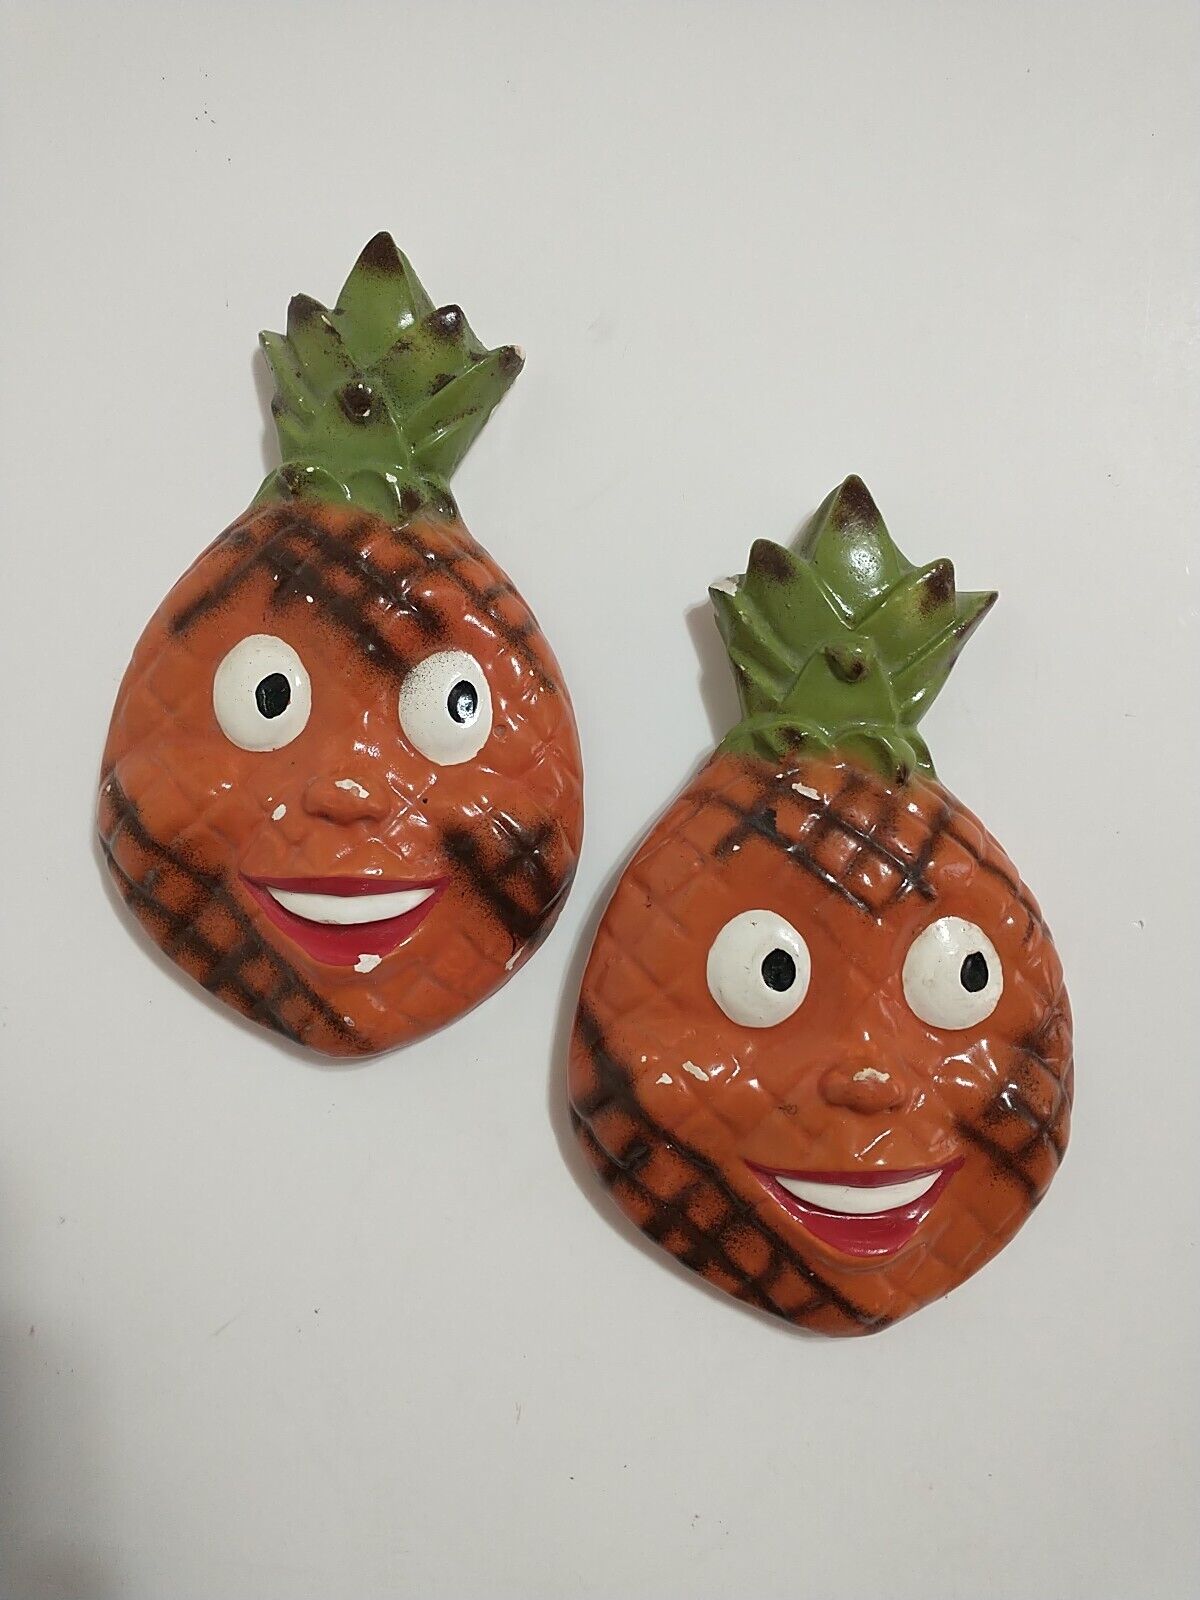 Vintage Anthropomorphic Fruit Faces Chalkware Pineapple Wall Hanging Plaques